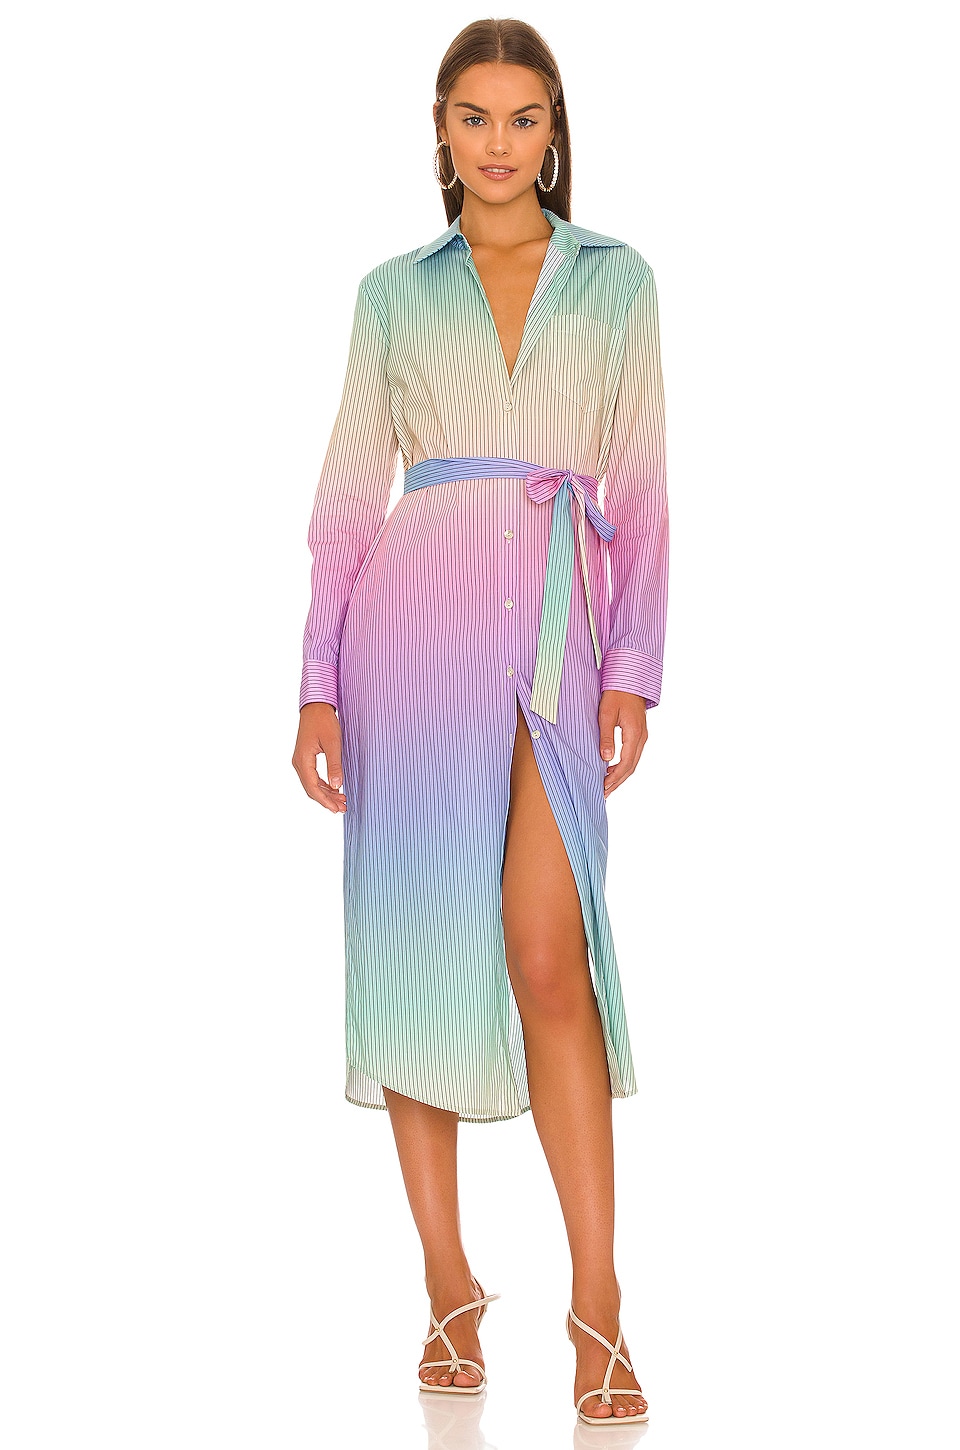 Le Superbe Girlfriend Cover Up Dress in Ombre Sky | REVOLVE